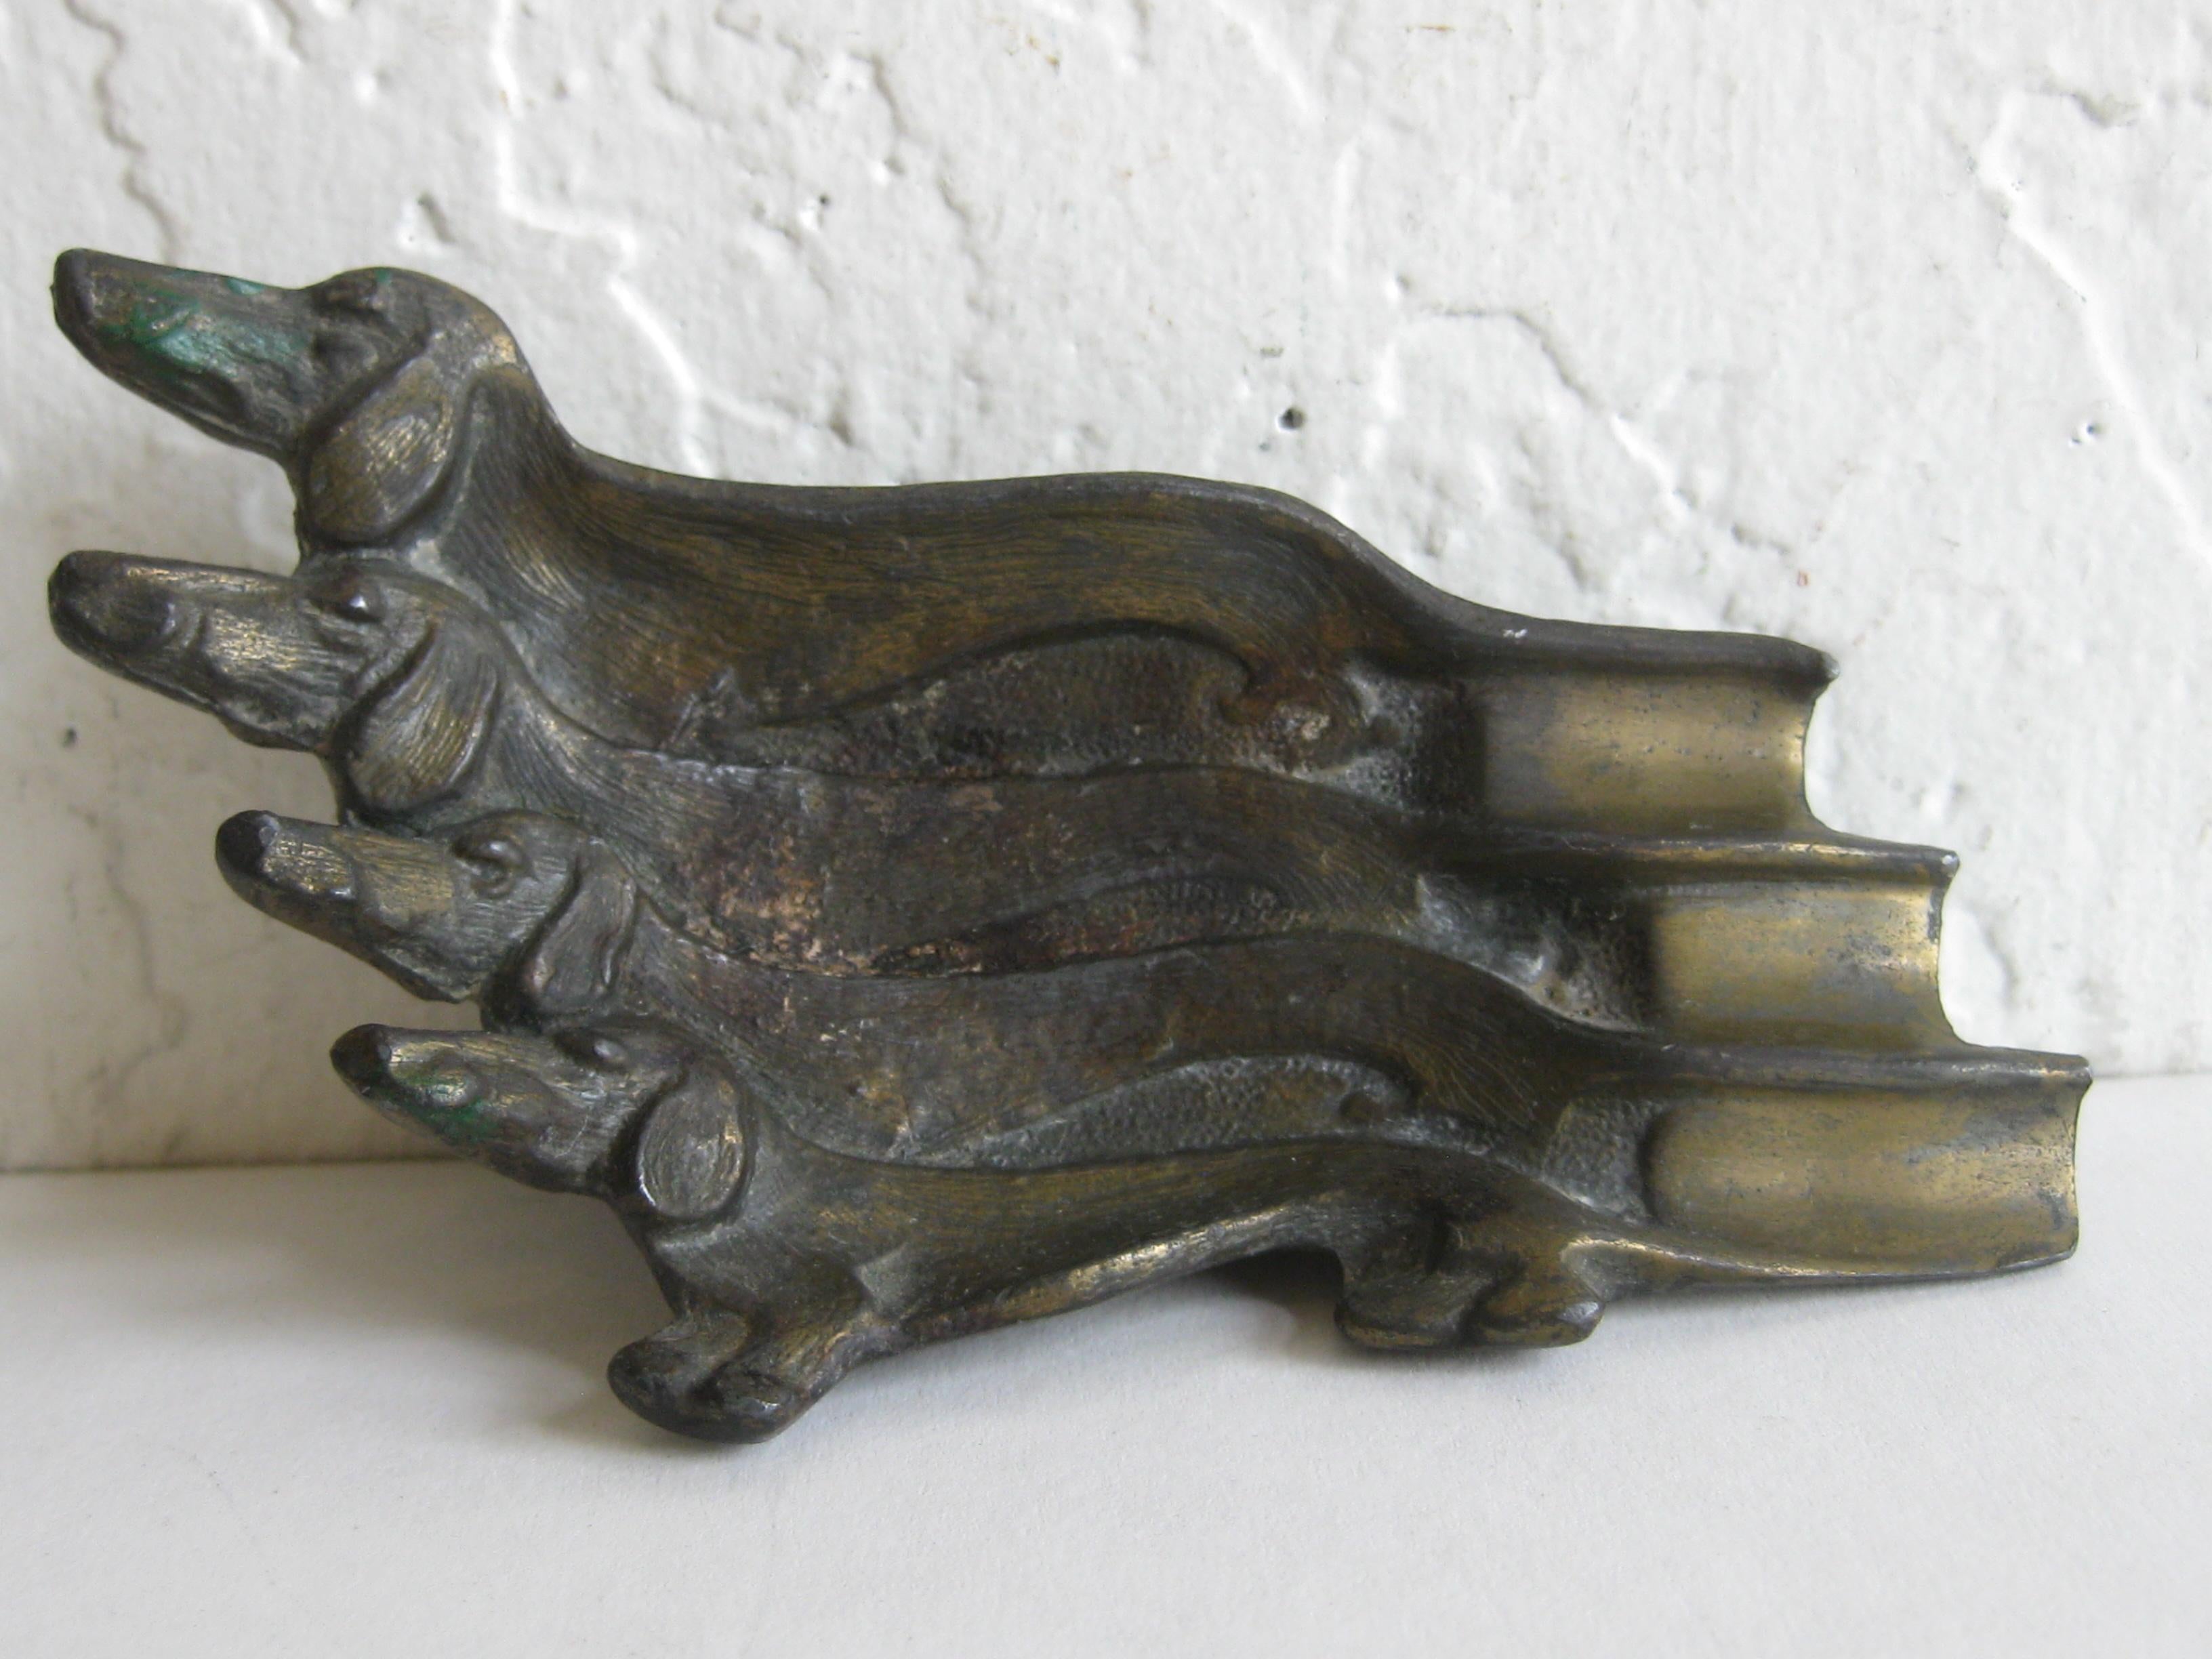 Great Art Deco figural dachshund dog ashtray. Made of cast metal and has a bronze finish. In very nice original condition with some patina. No broken parts, no cracks and no repairs. Measures 4 1/2